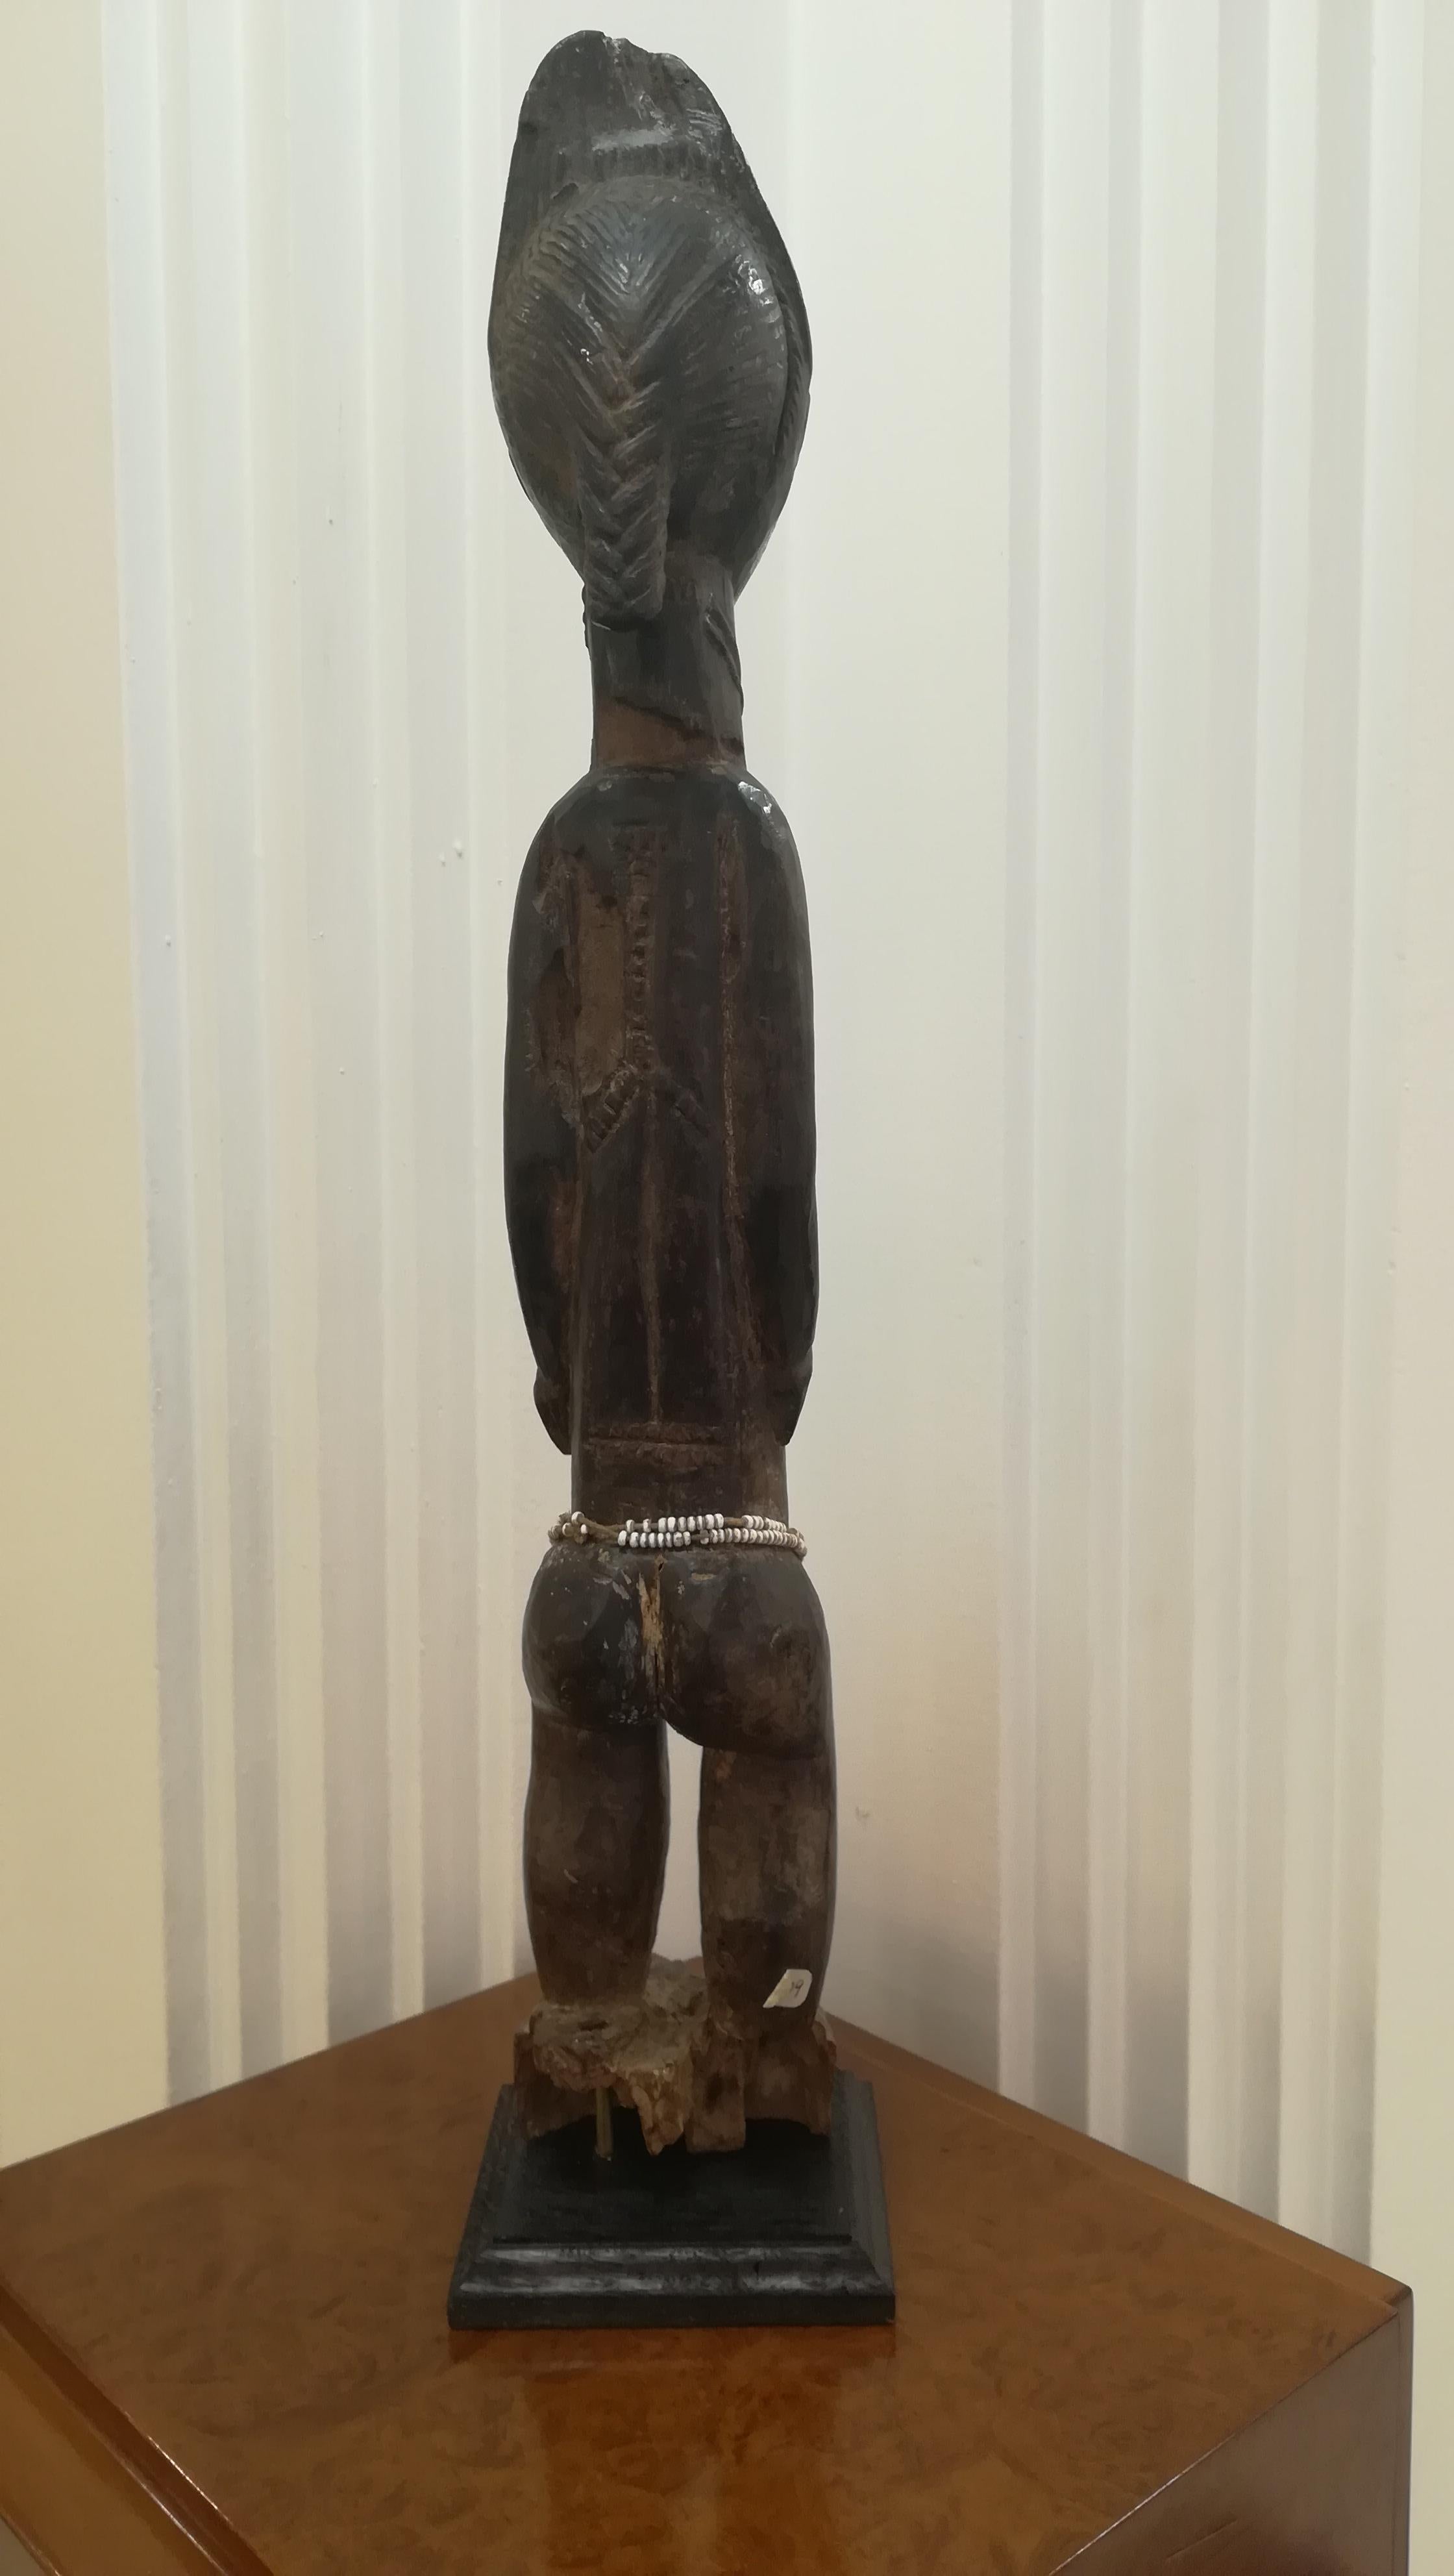 20th Century Ivory Coast Baoule Figure with Provenance